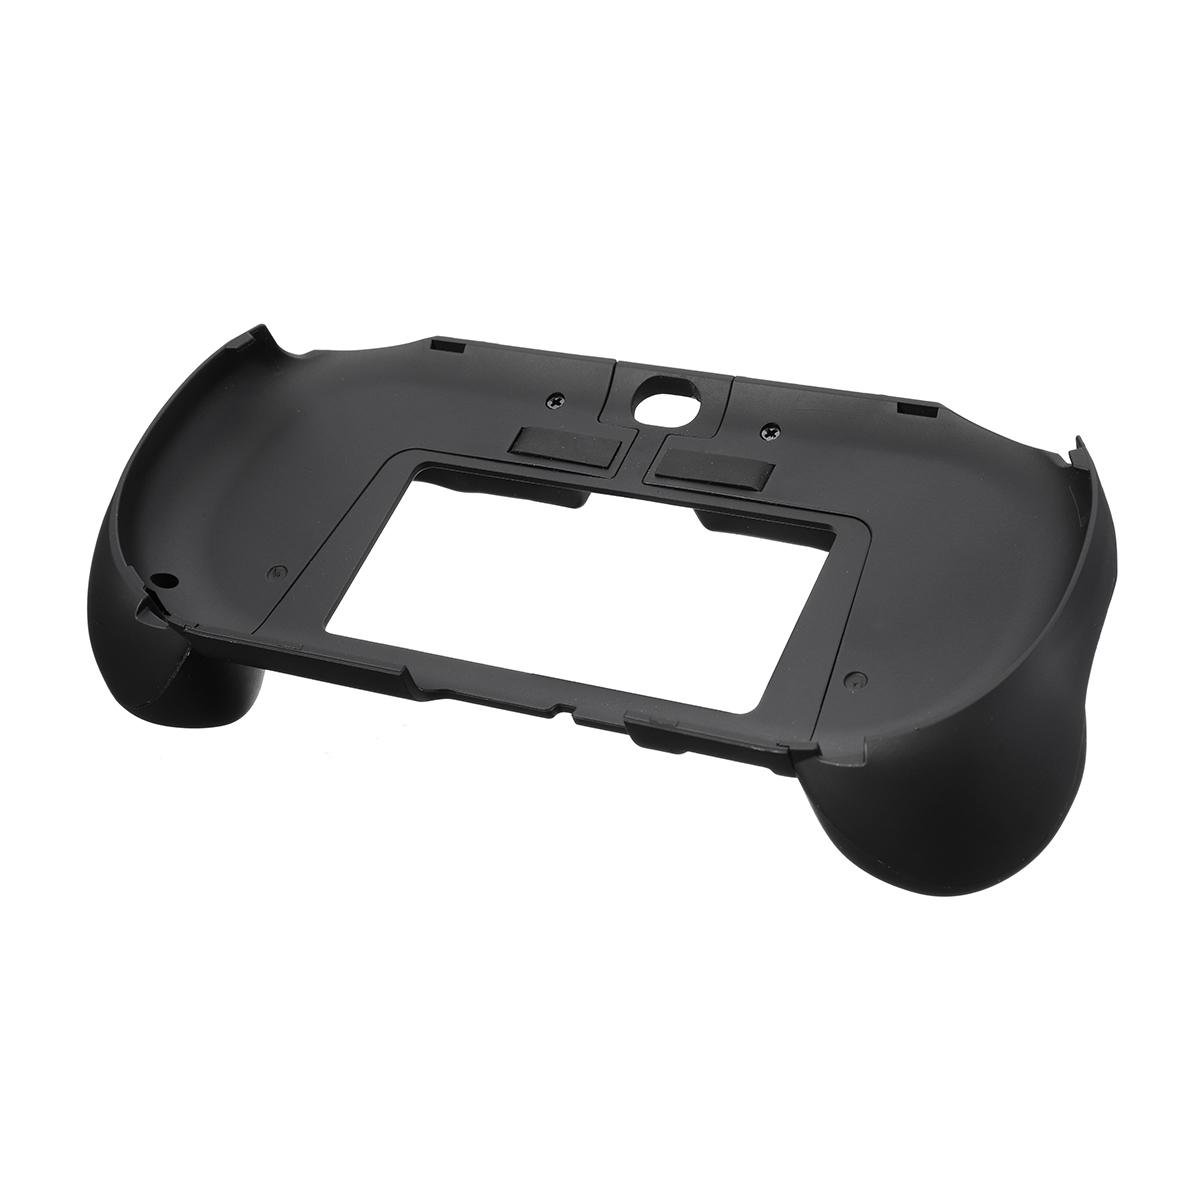 L2 R2 Trigger Grips Handle Shell Protective Case for Sony PlayStation PS Vita 2000 Game Console 13